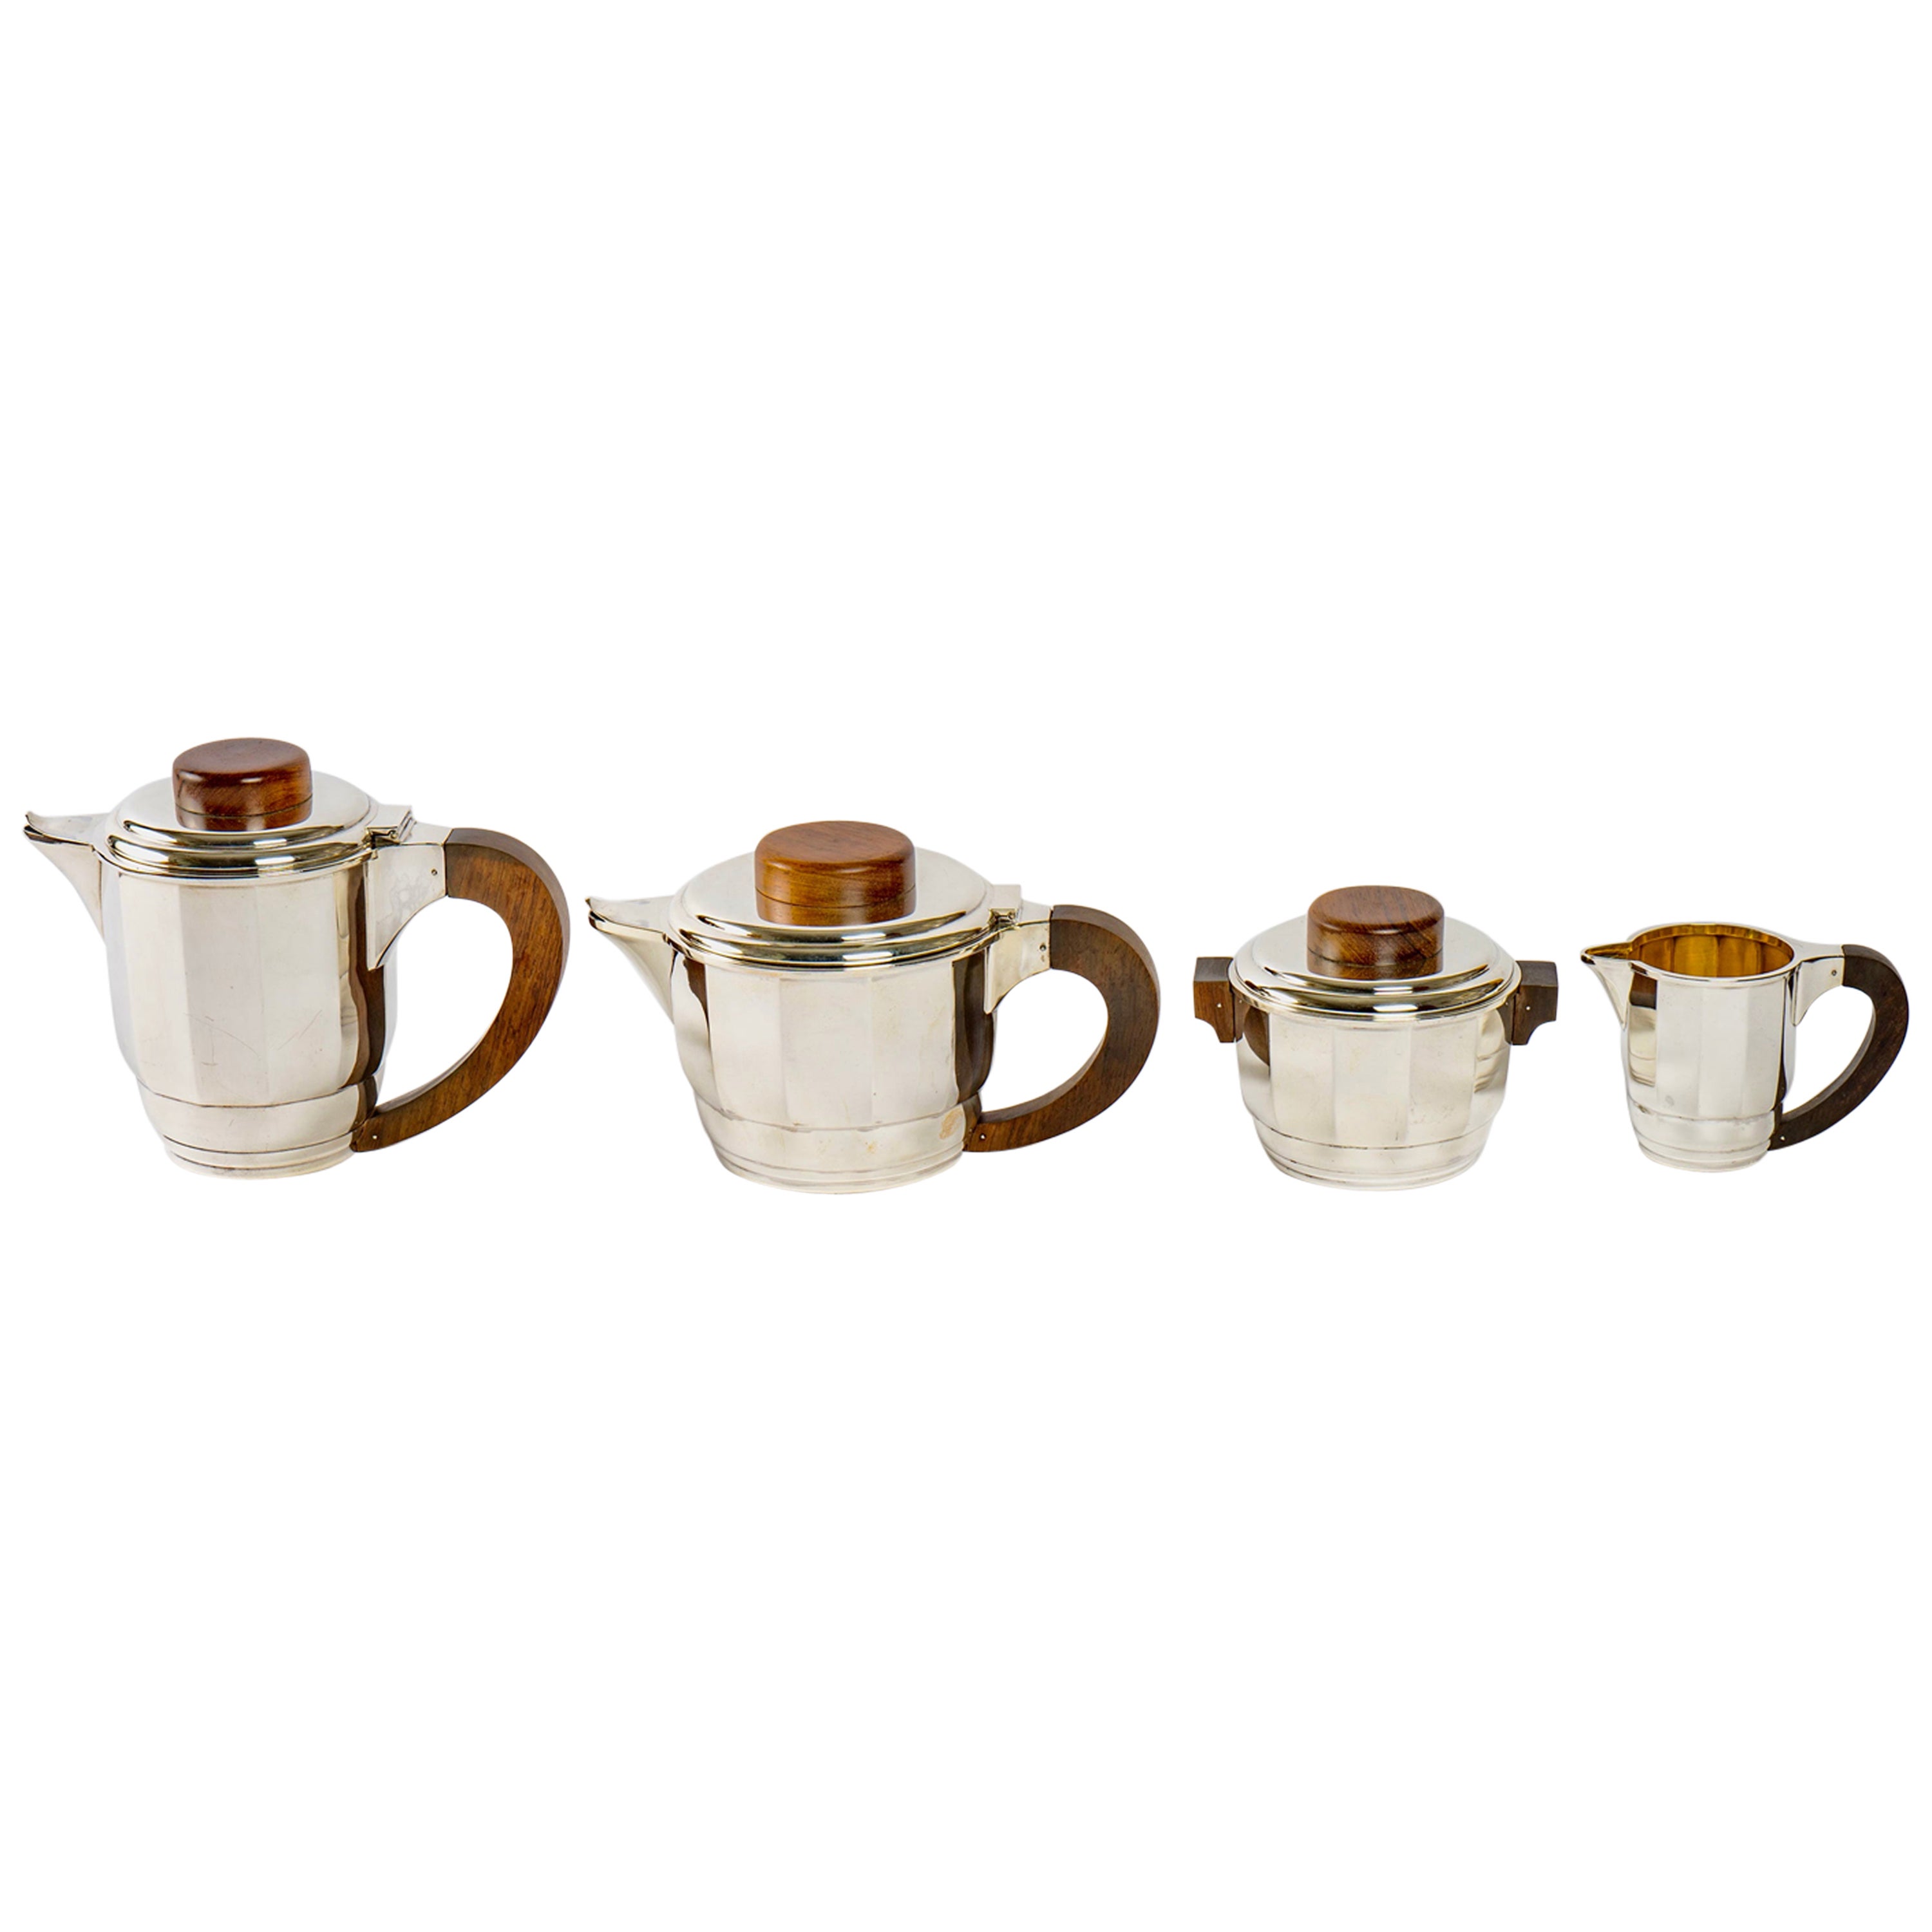 1925 Puiforcat, Tea and Coffee Set in Sterling Silver and Rosewood